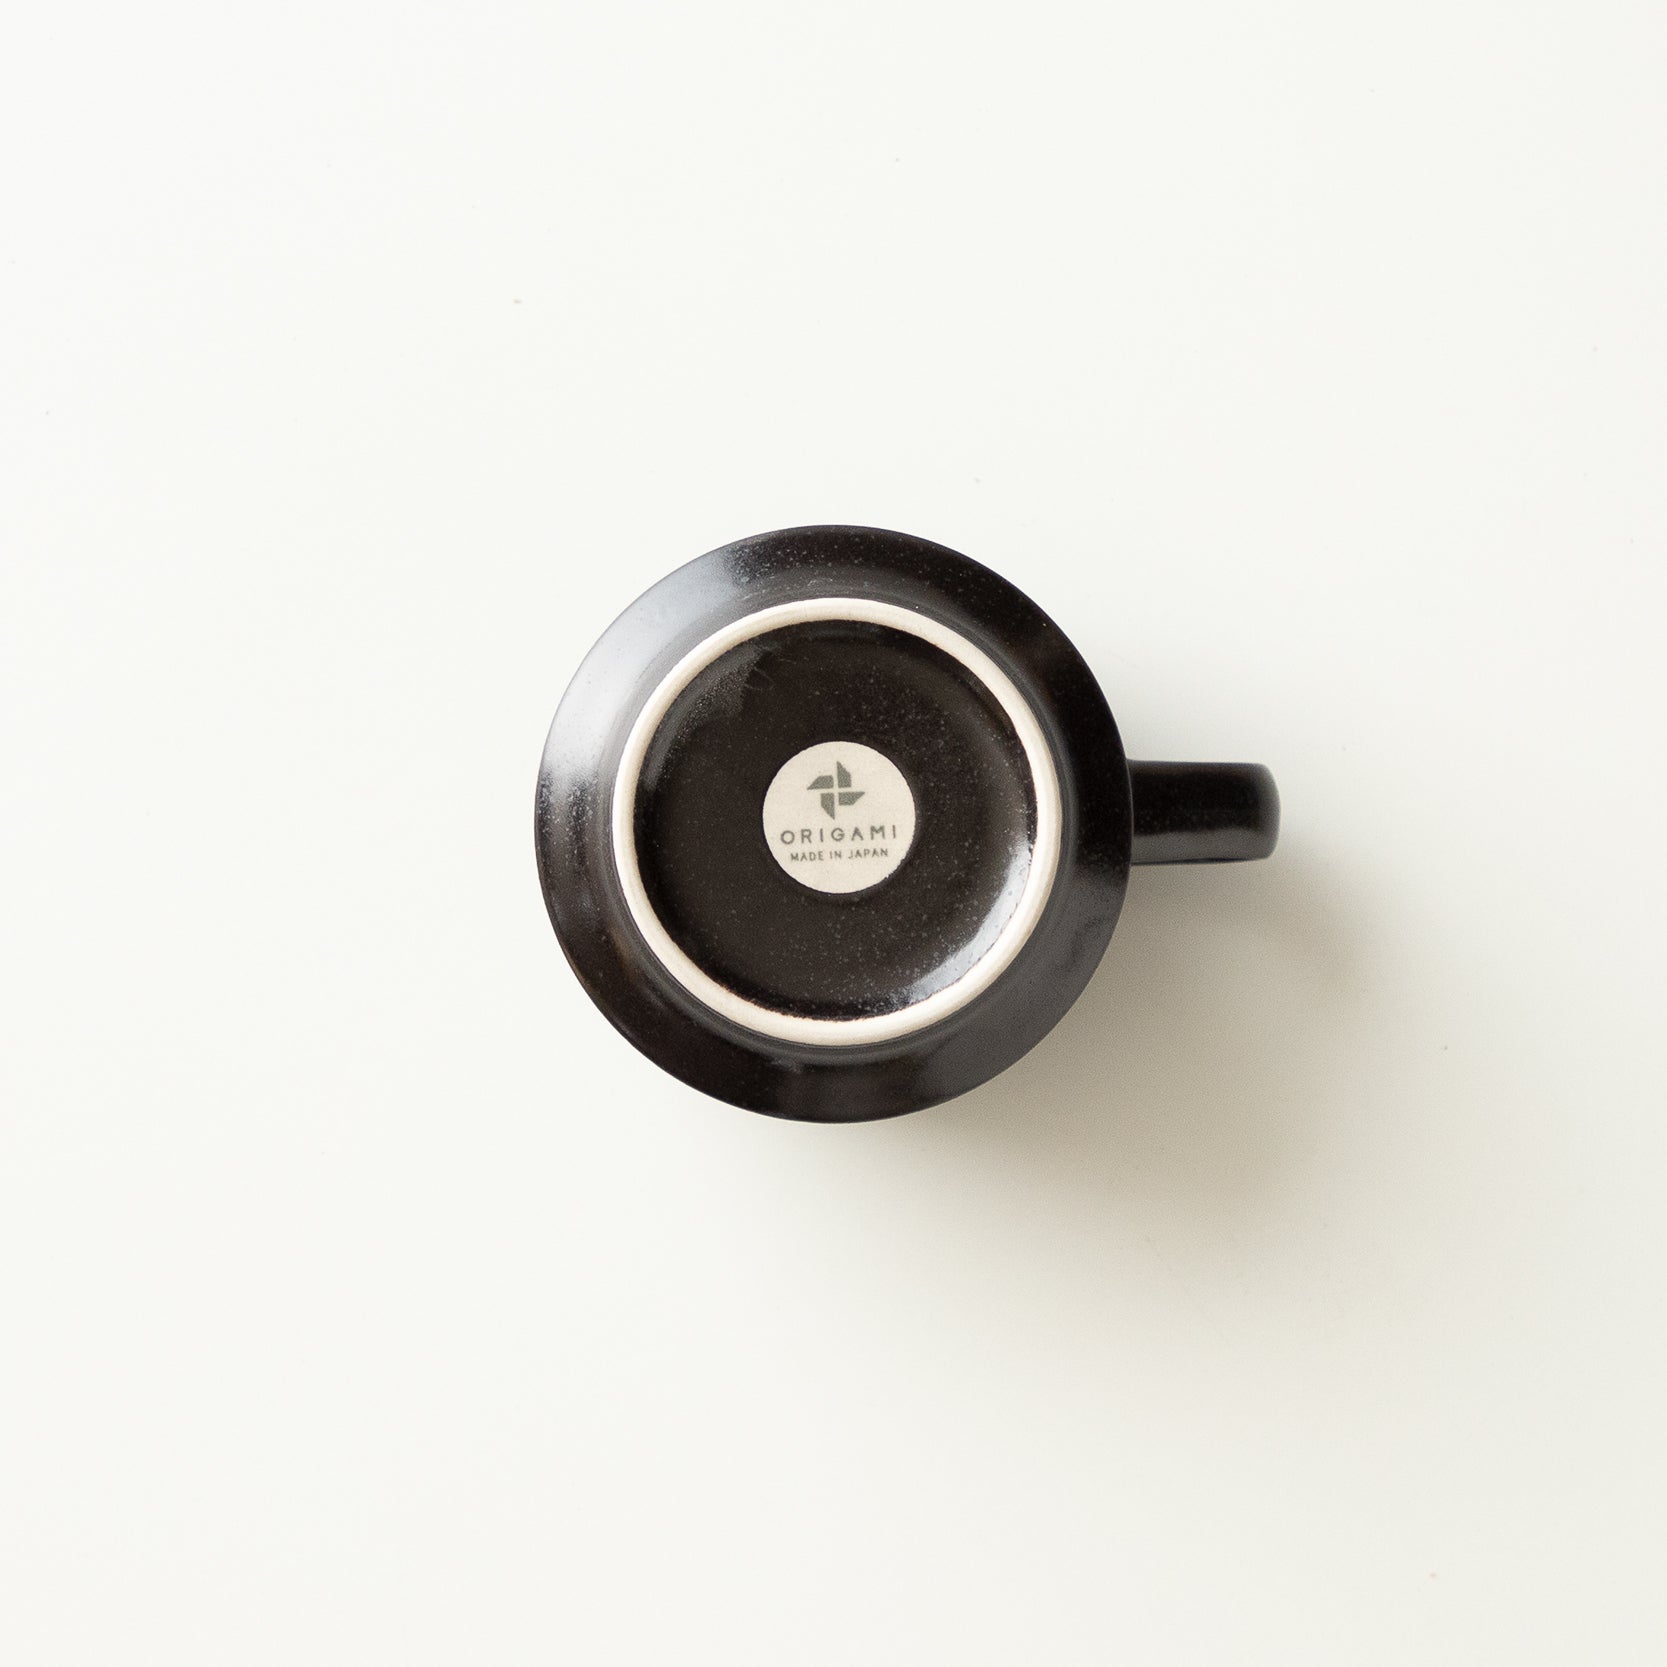 Flare Coffee Cup